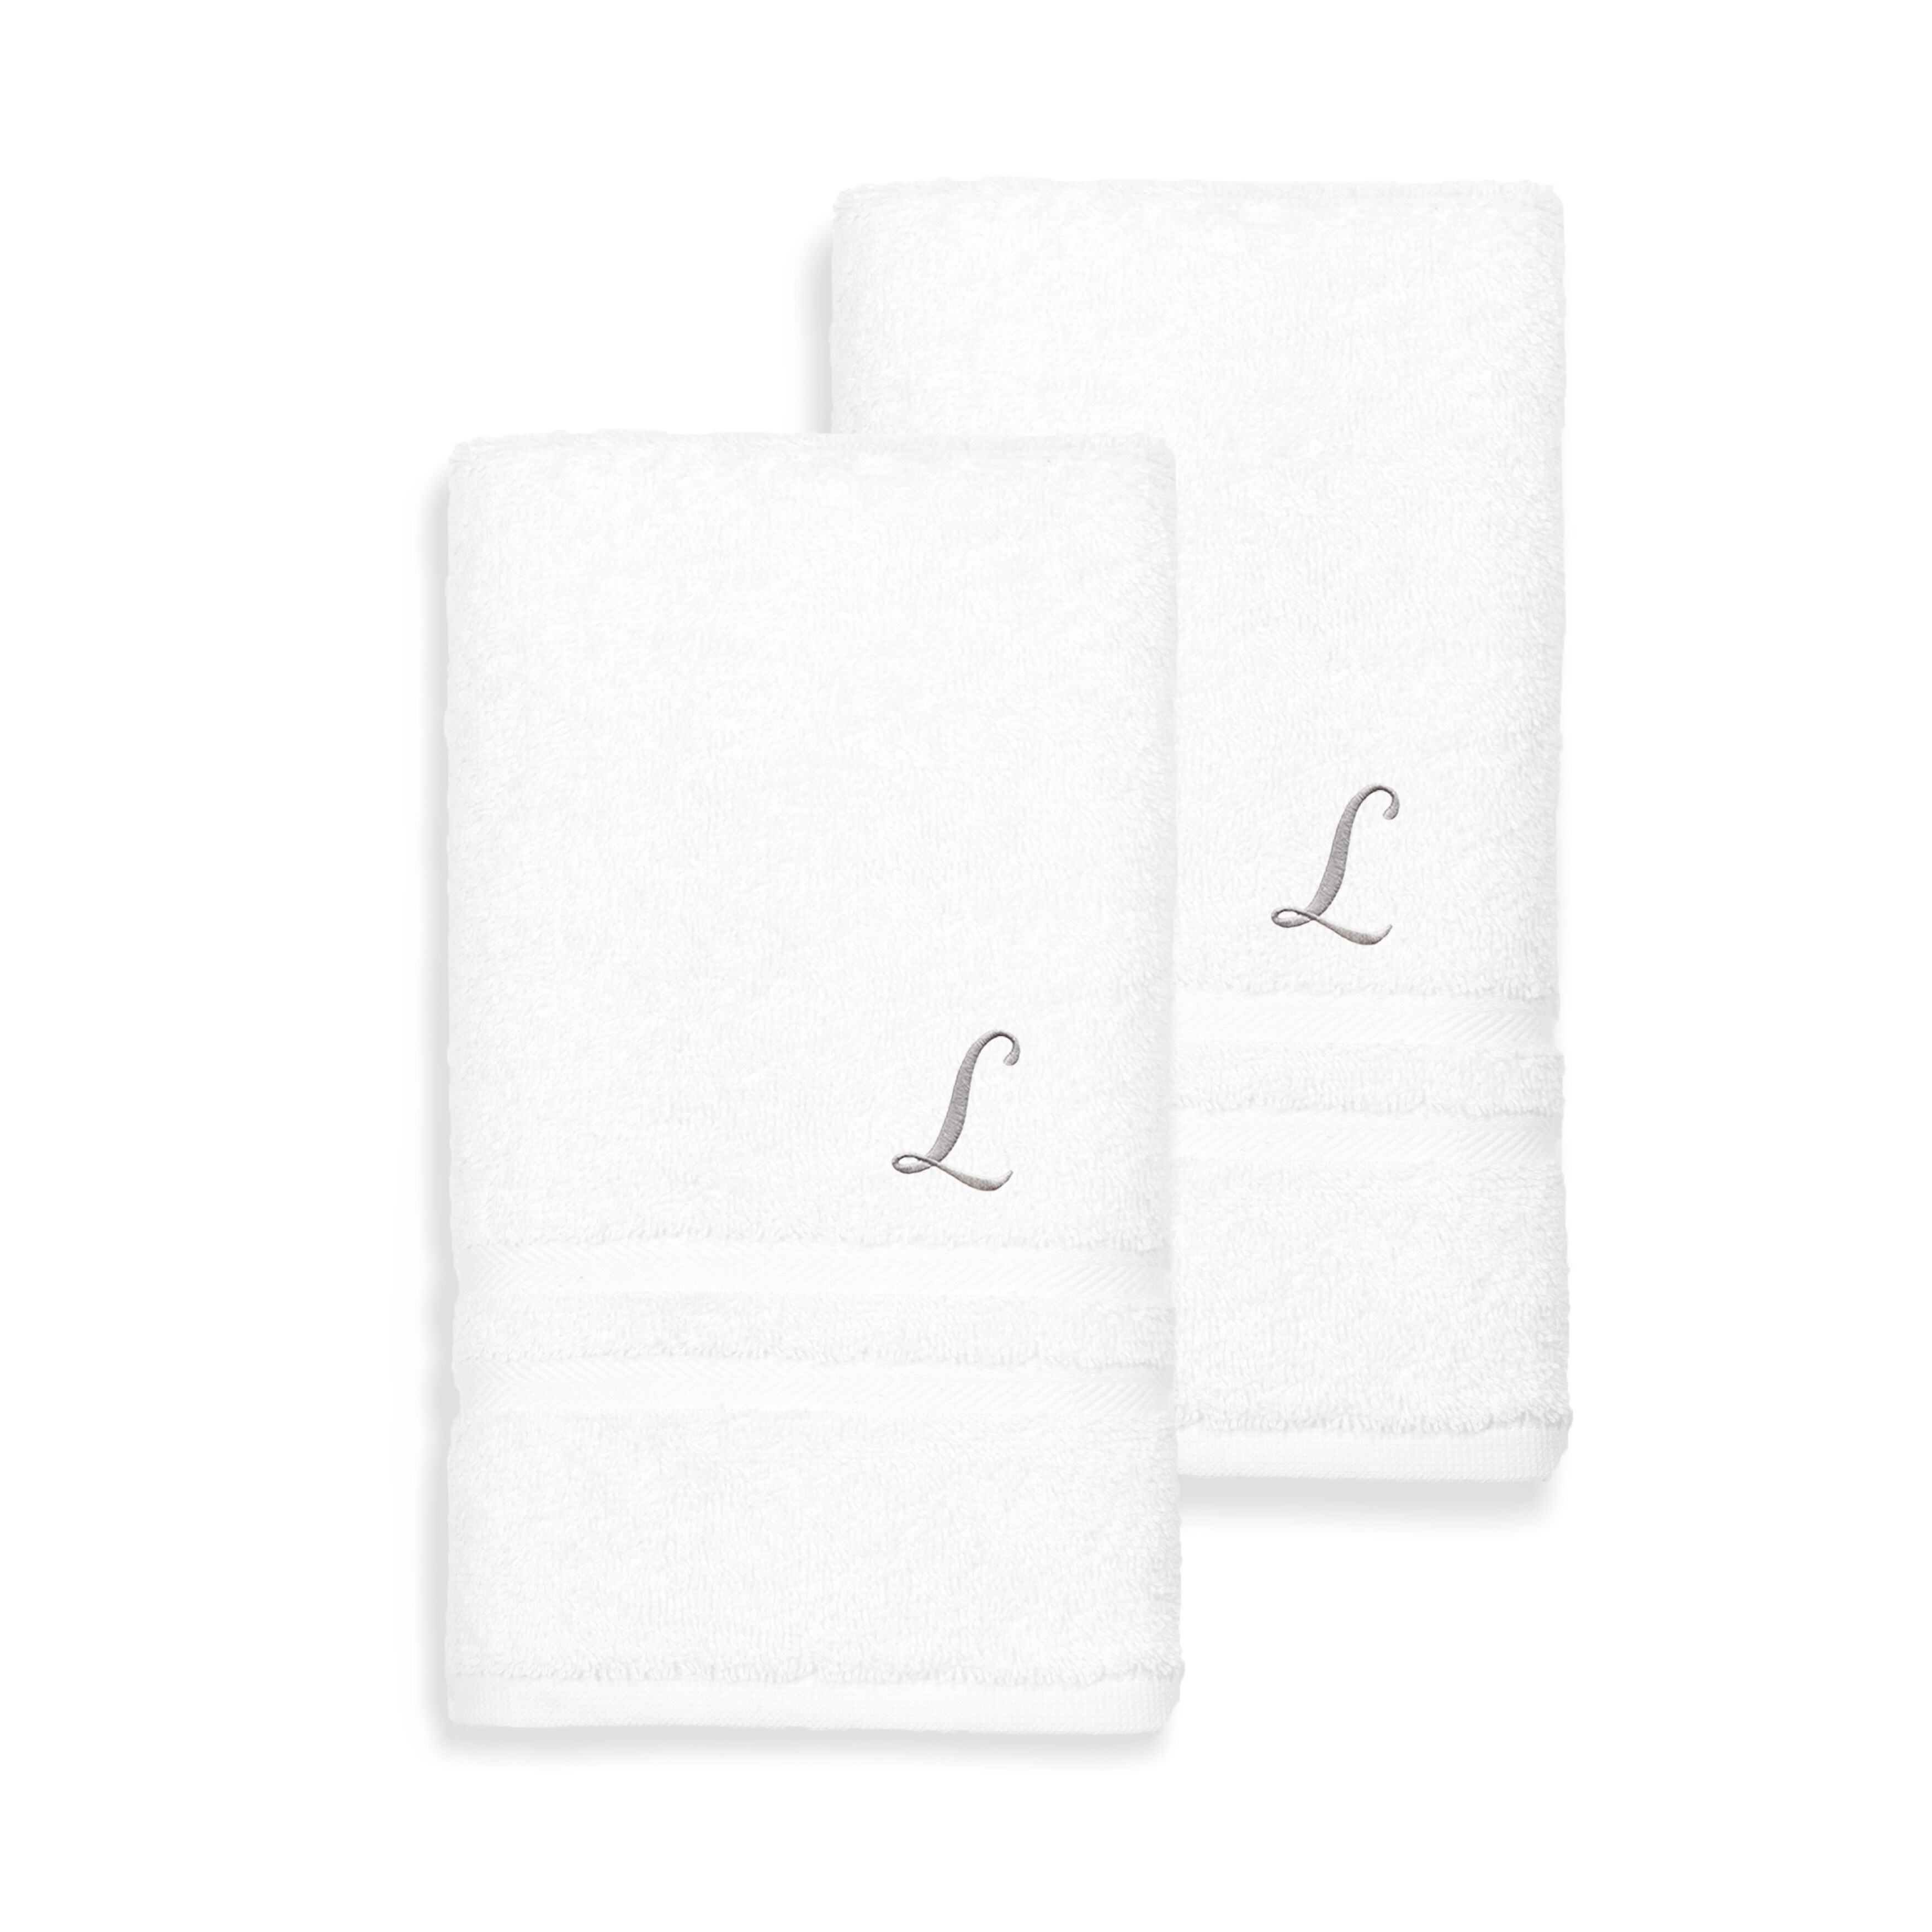 https://ak1.ostkcdn.com/images/products/12854014/Authentic-Hotel-and-Spa-Omni-Turkish-Cotton-Terry-Set-of-2-White-Hand-Towels-with-Grey-Script-Monogrammed-Initial-7bf72854-b14a-4e6c-96f7-a28ffb72bf81.jpg